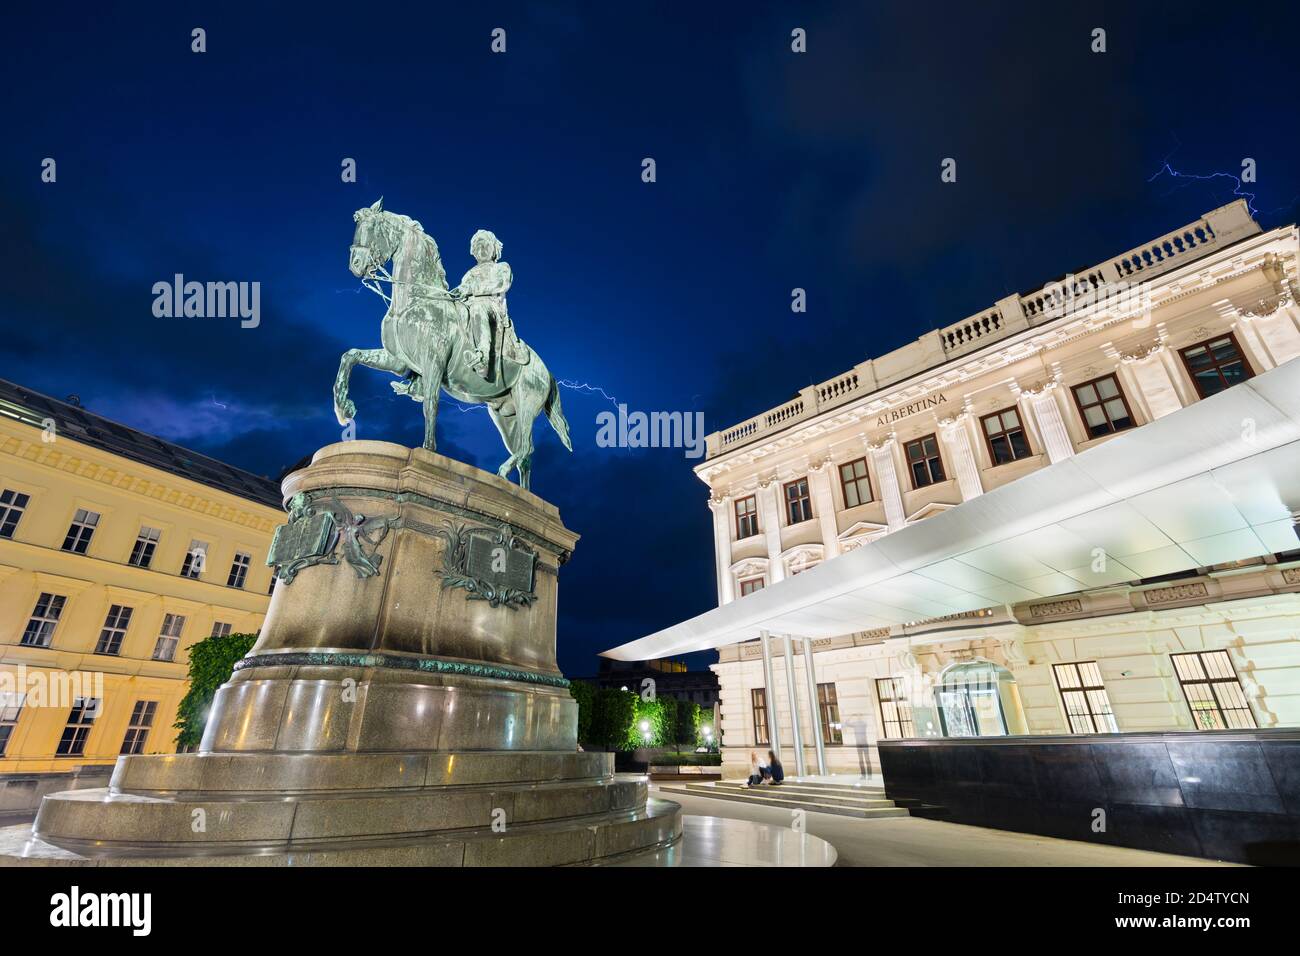 VIENNA - MAY 2: The Albertina building with lightning during a thunderstorm behind the Erzherzog Albrecht Statue at night in Austria on May 2, 2018. Stock Photo